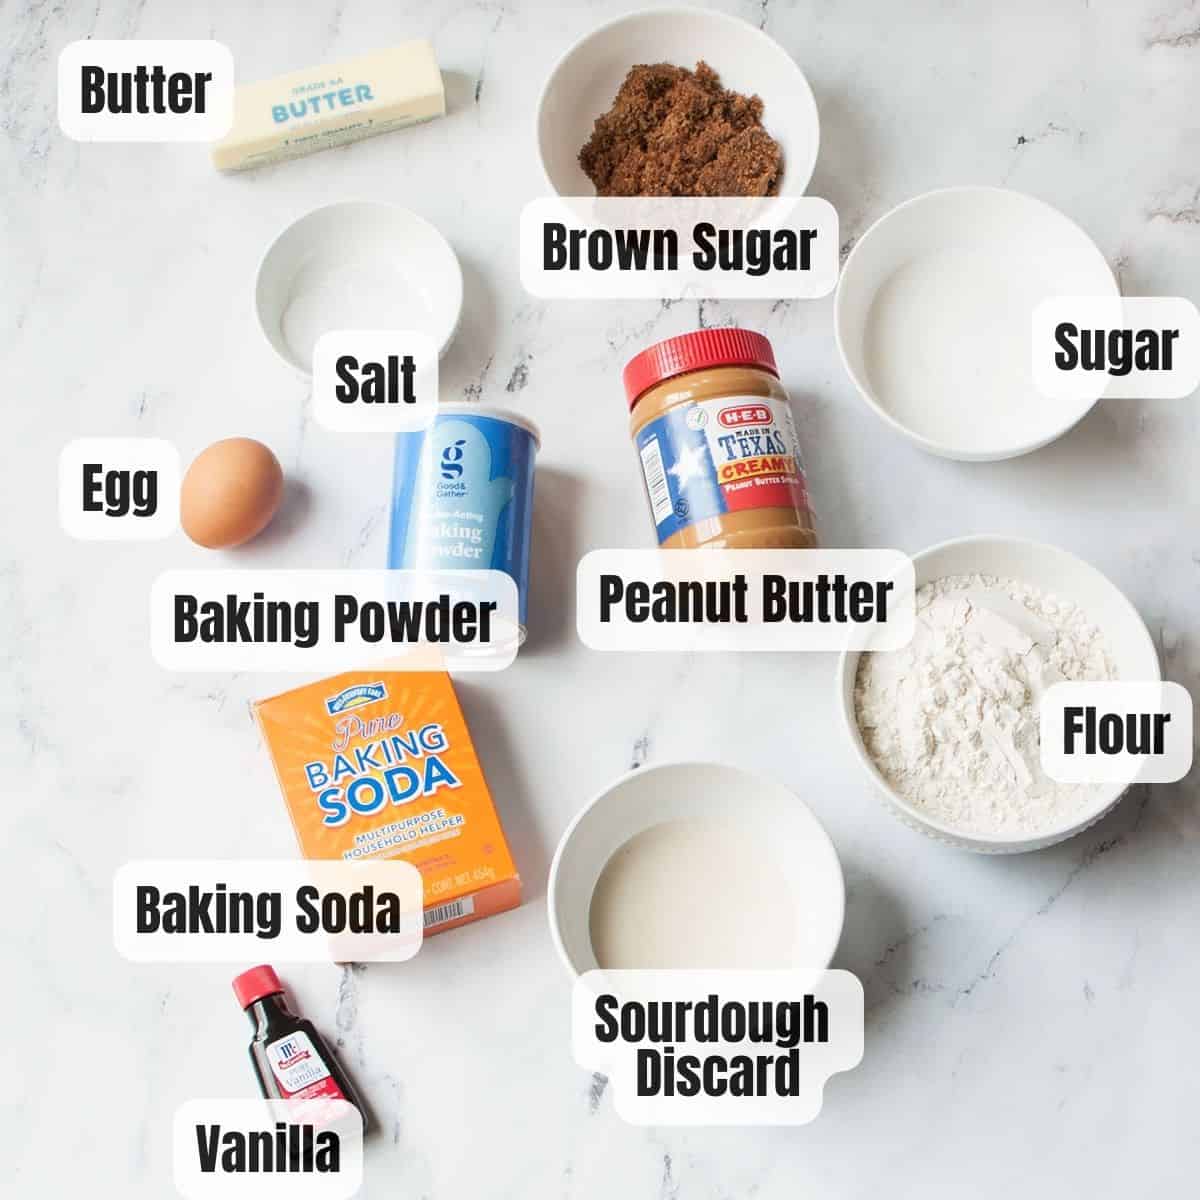 ingredients needed to make sourdough discard peanut butter cookies